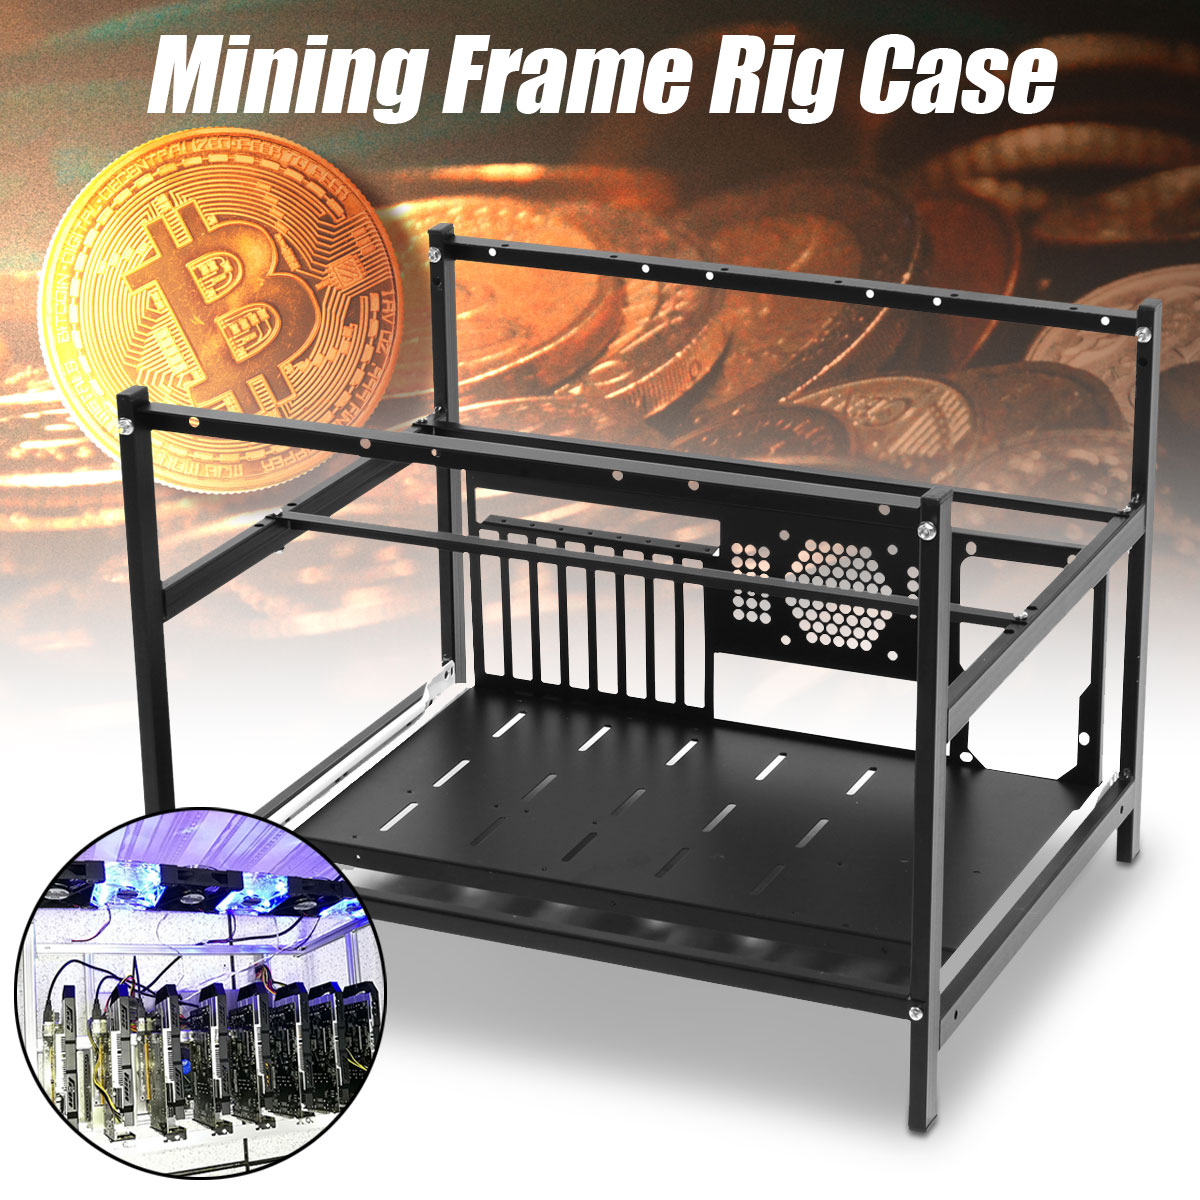 Steel-Crypto-Coin-Open-Air-Mining-Miner-Frame-Rig-Case-For-6-GPU-ETH-Ethereum-1509224